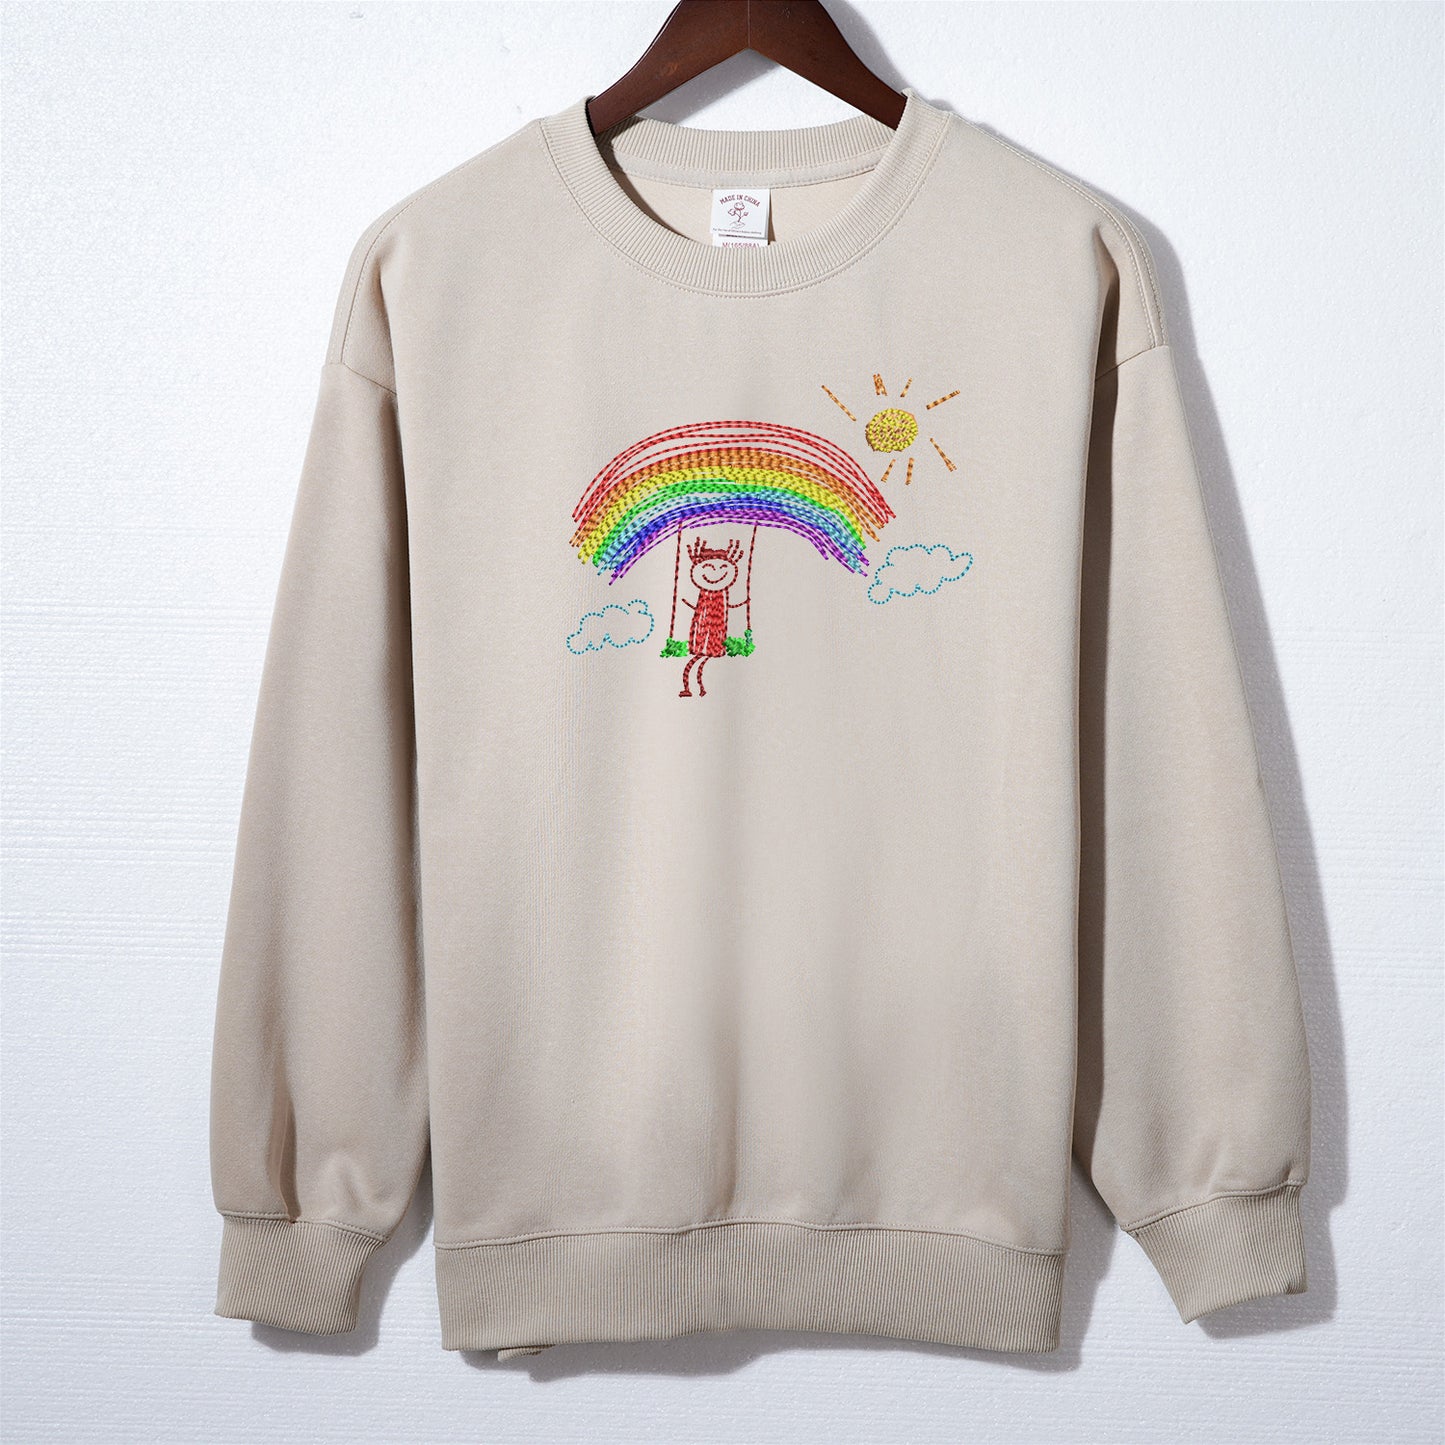 Personalized Kids Painting Embroidered Sweatshirt, Hand-painted Embroidered T-shirt, Special Gift for Parents